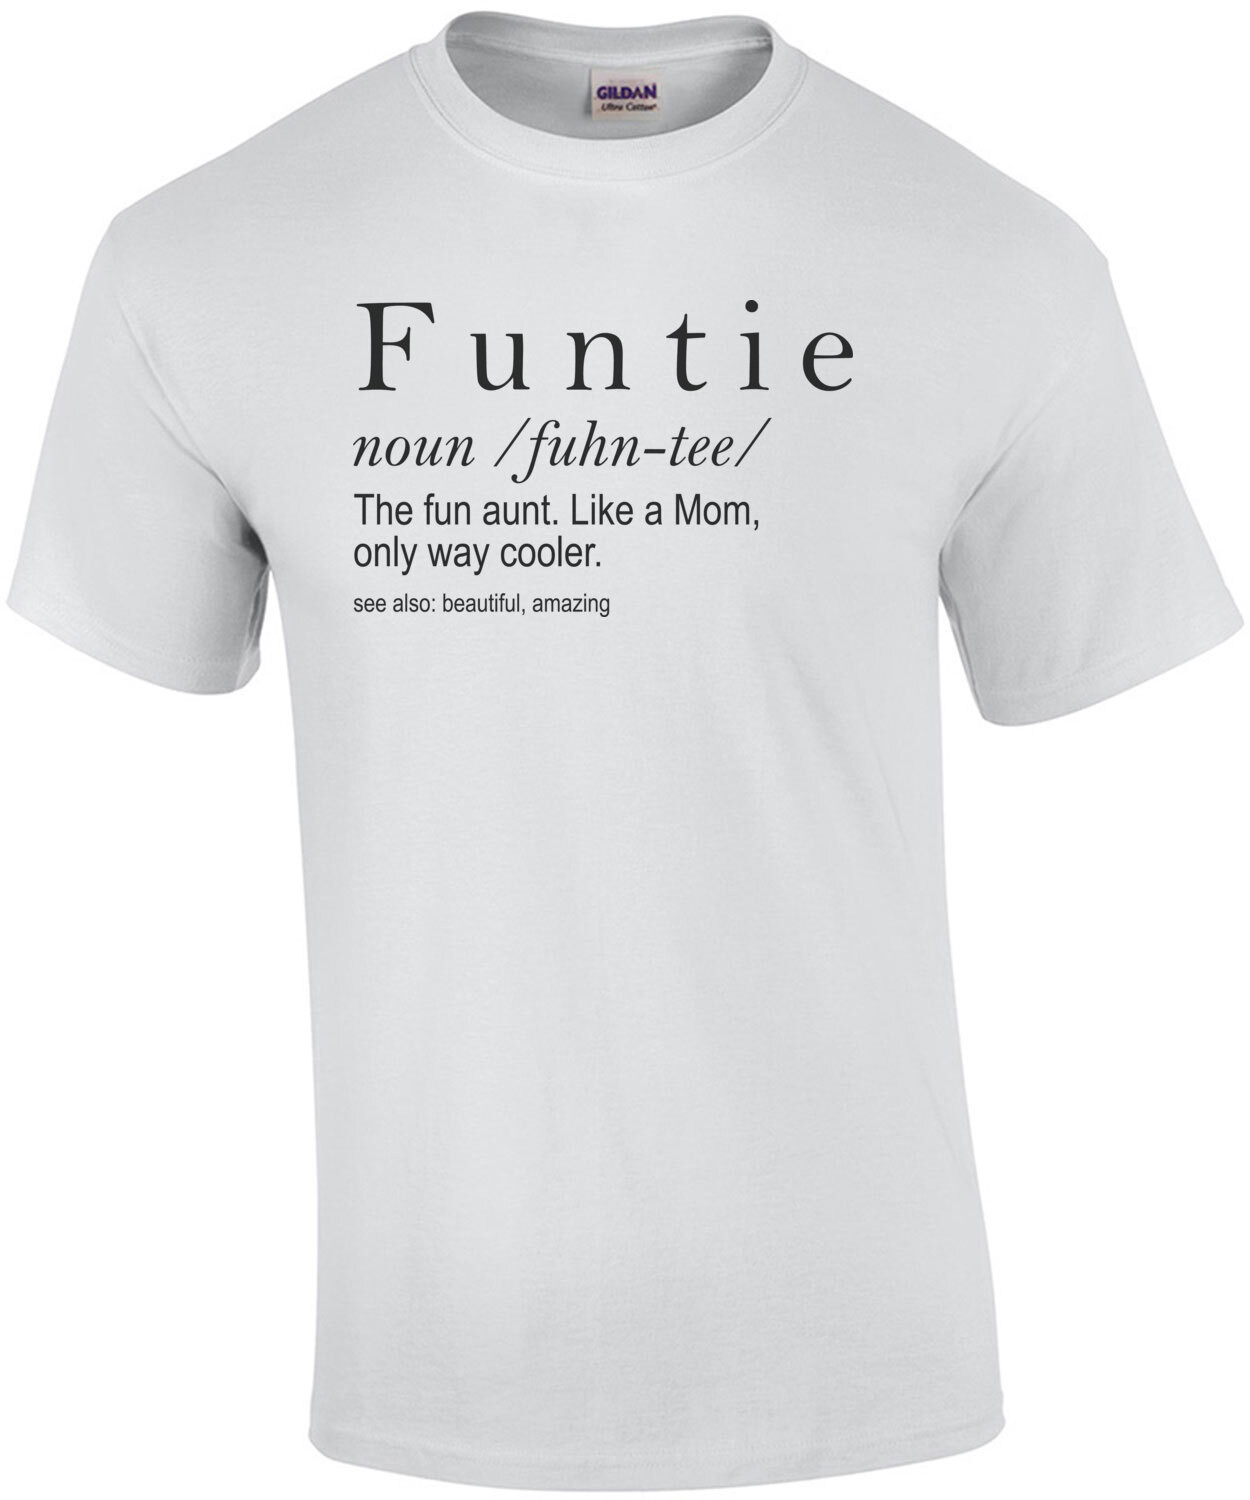 Funtie - Like a mom only way cooler - funny aunt t-shirt